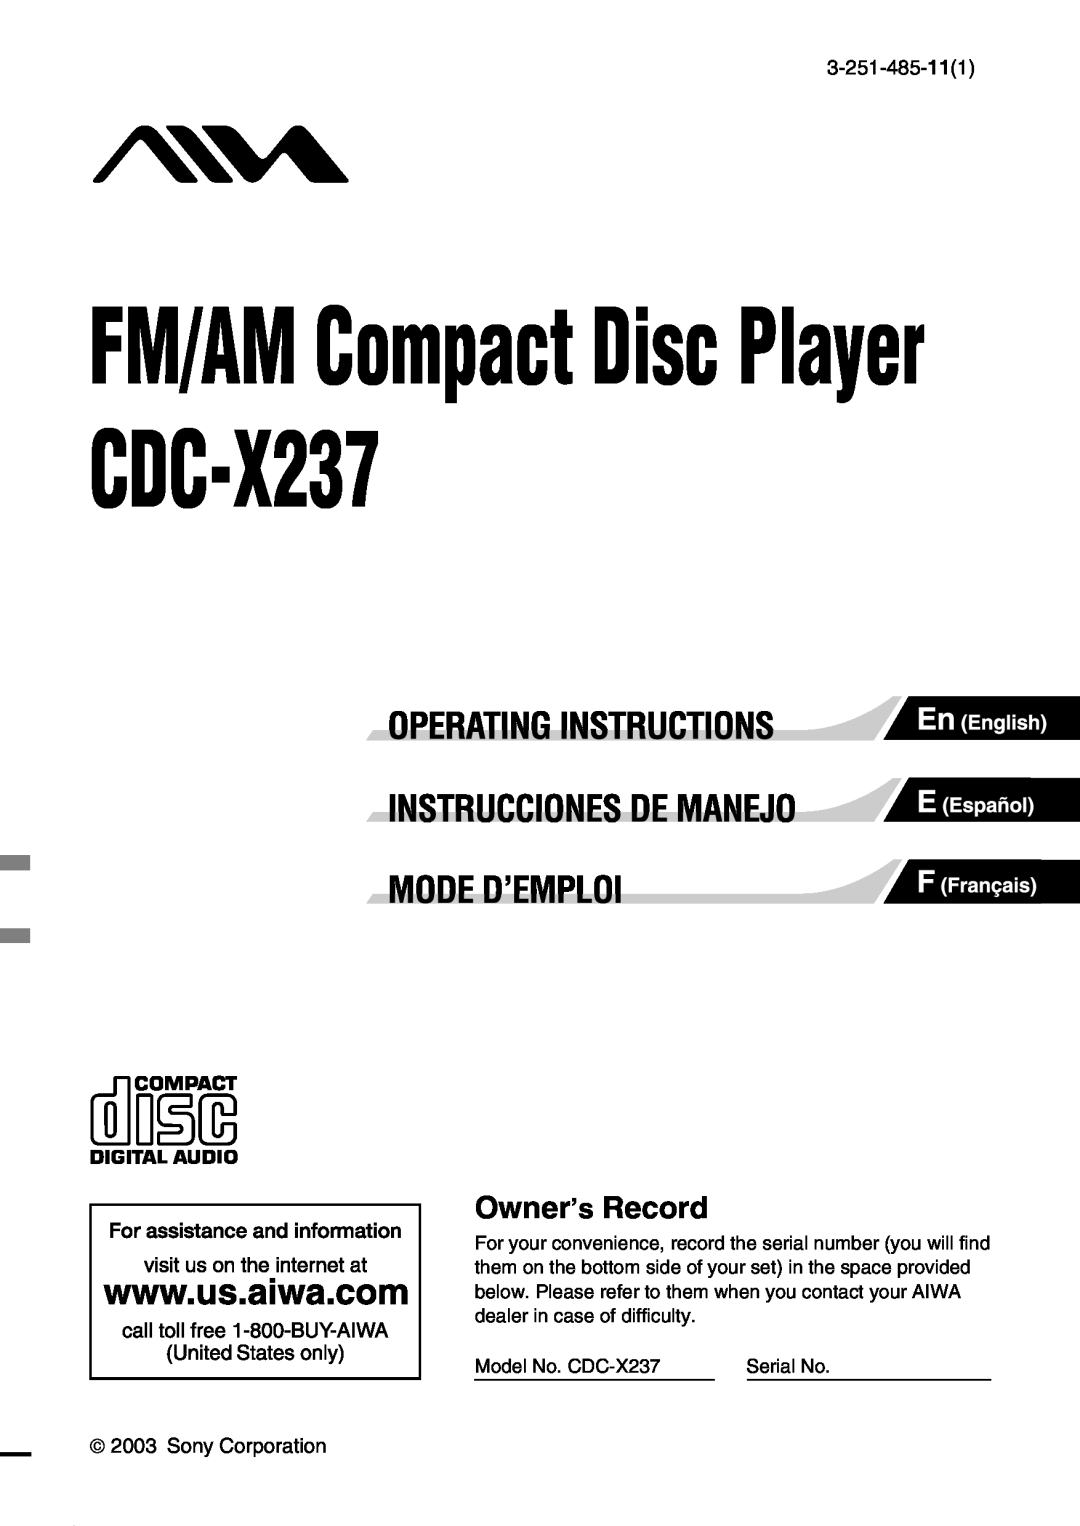 Aiwa manual 3-251-485-111,  2003 Sony Corporation, FM/AM Compact Disc Player CDC-X237, Owner’s Record, Serial No 